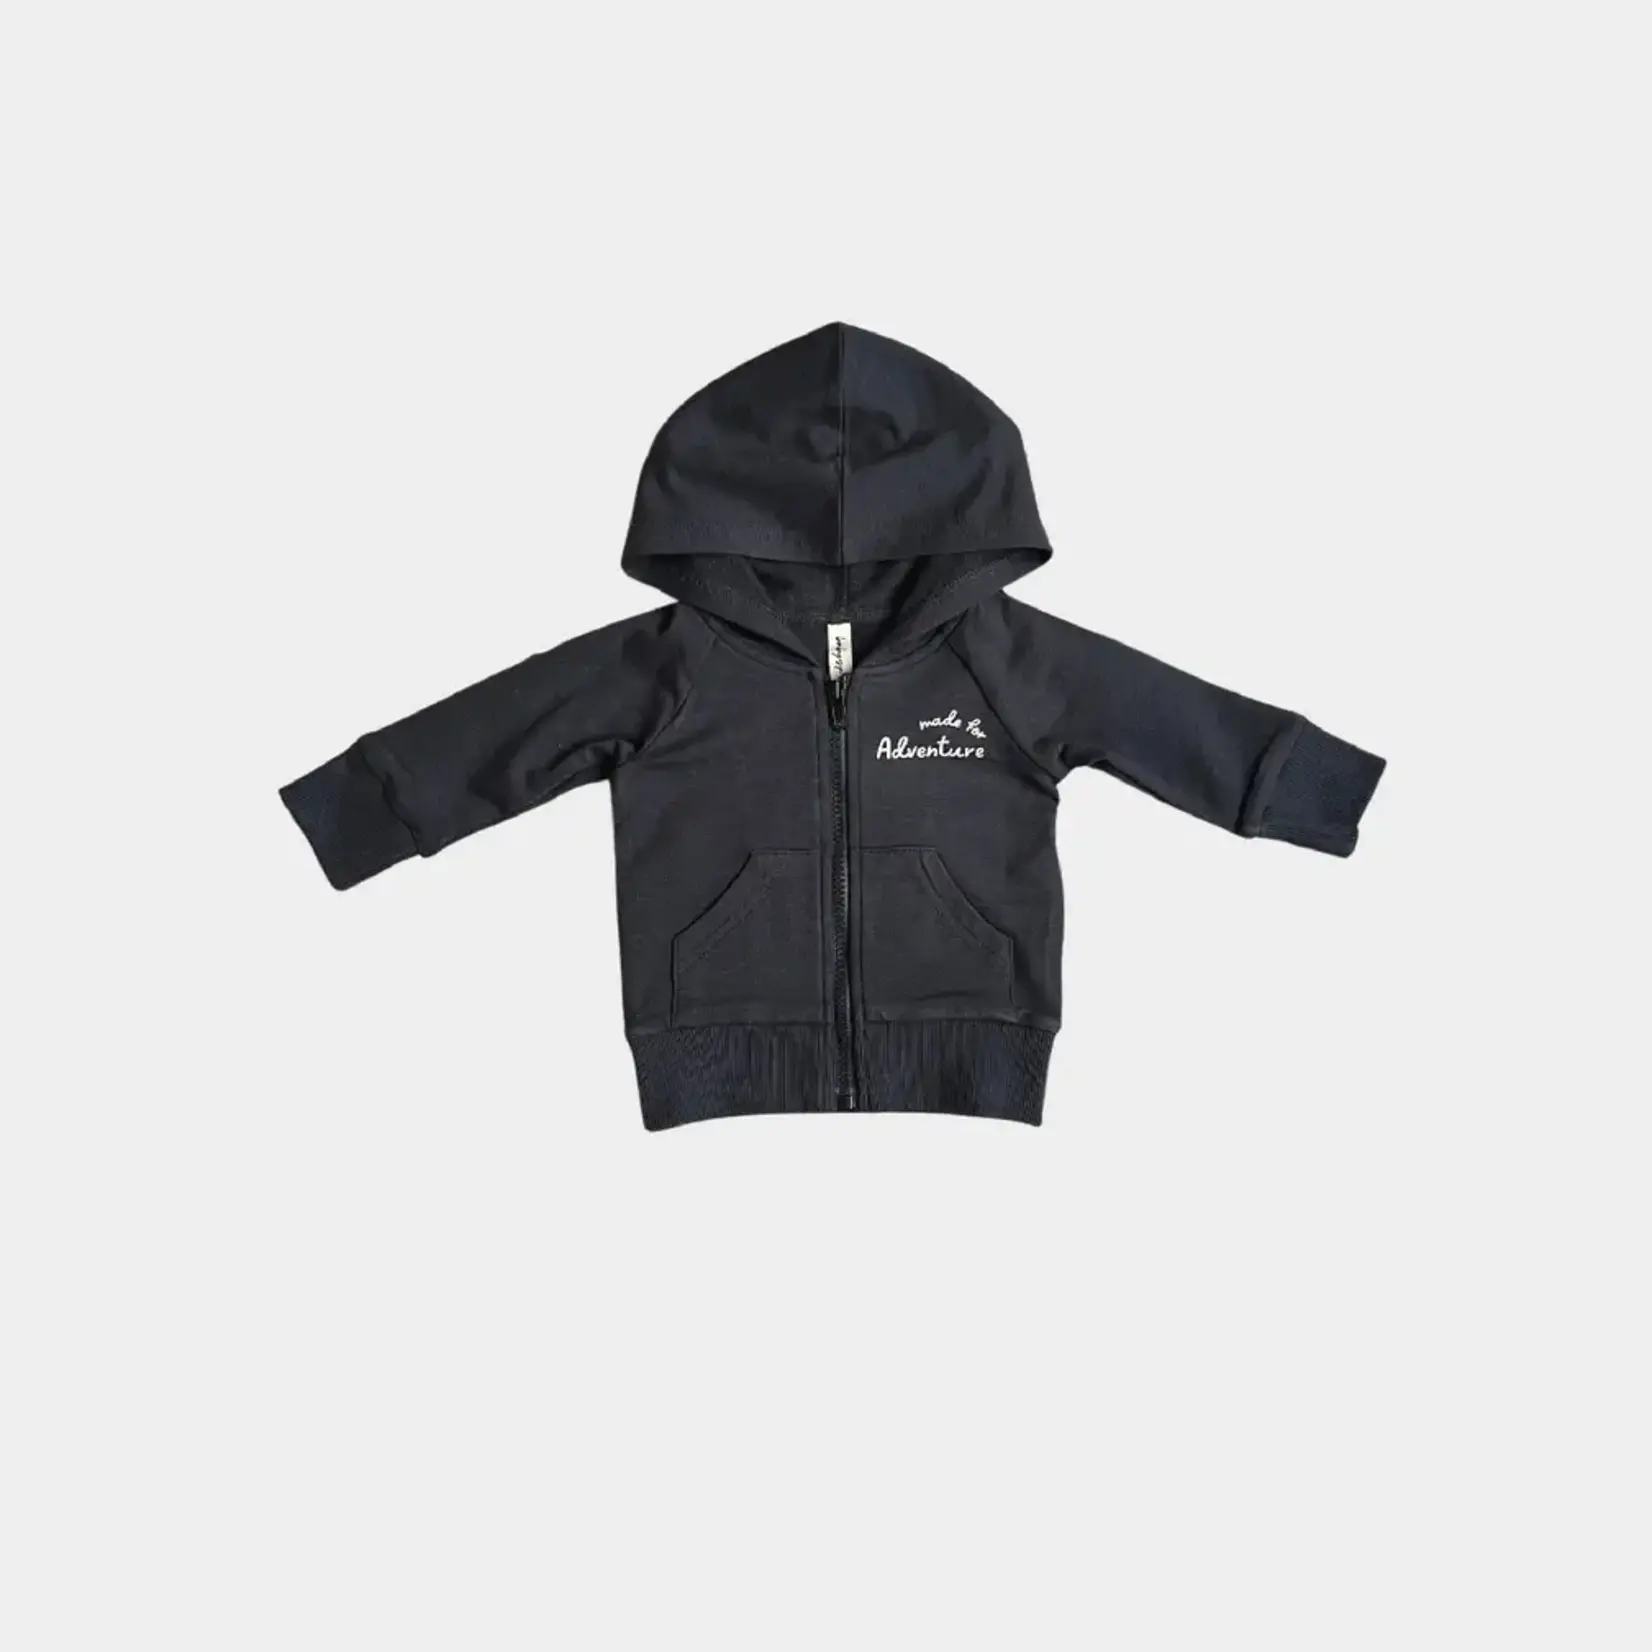 babysprouts clothing company Kids Hooded Jacket in Made For Adventure